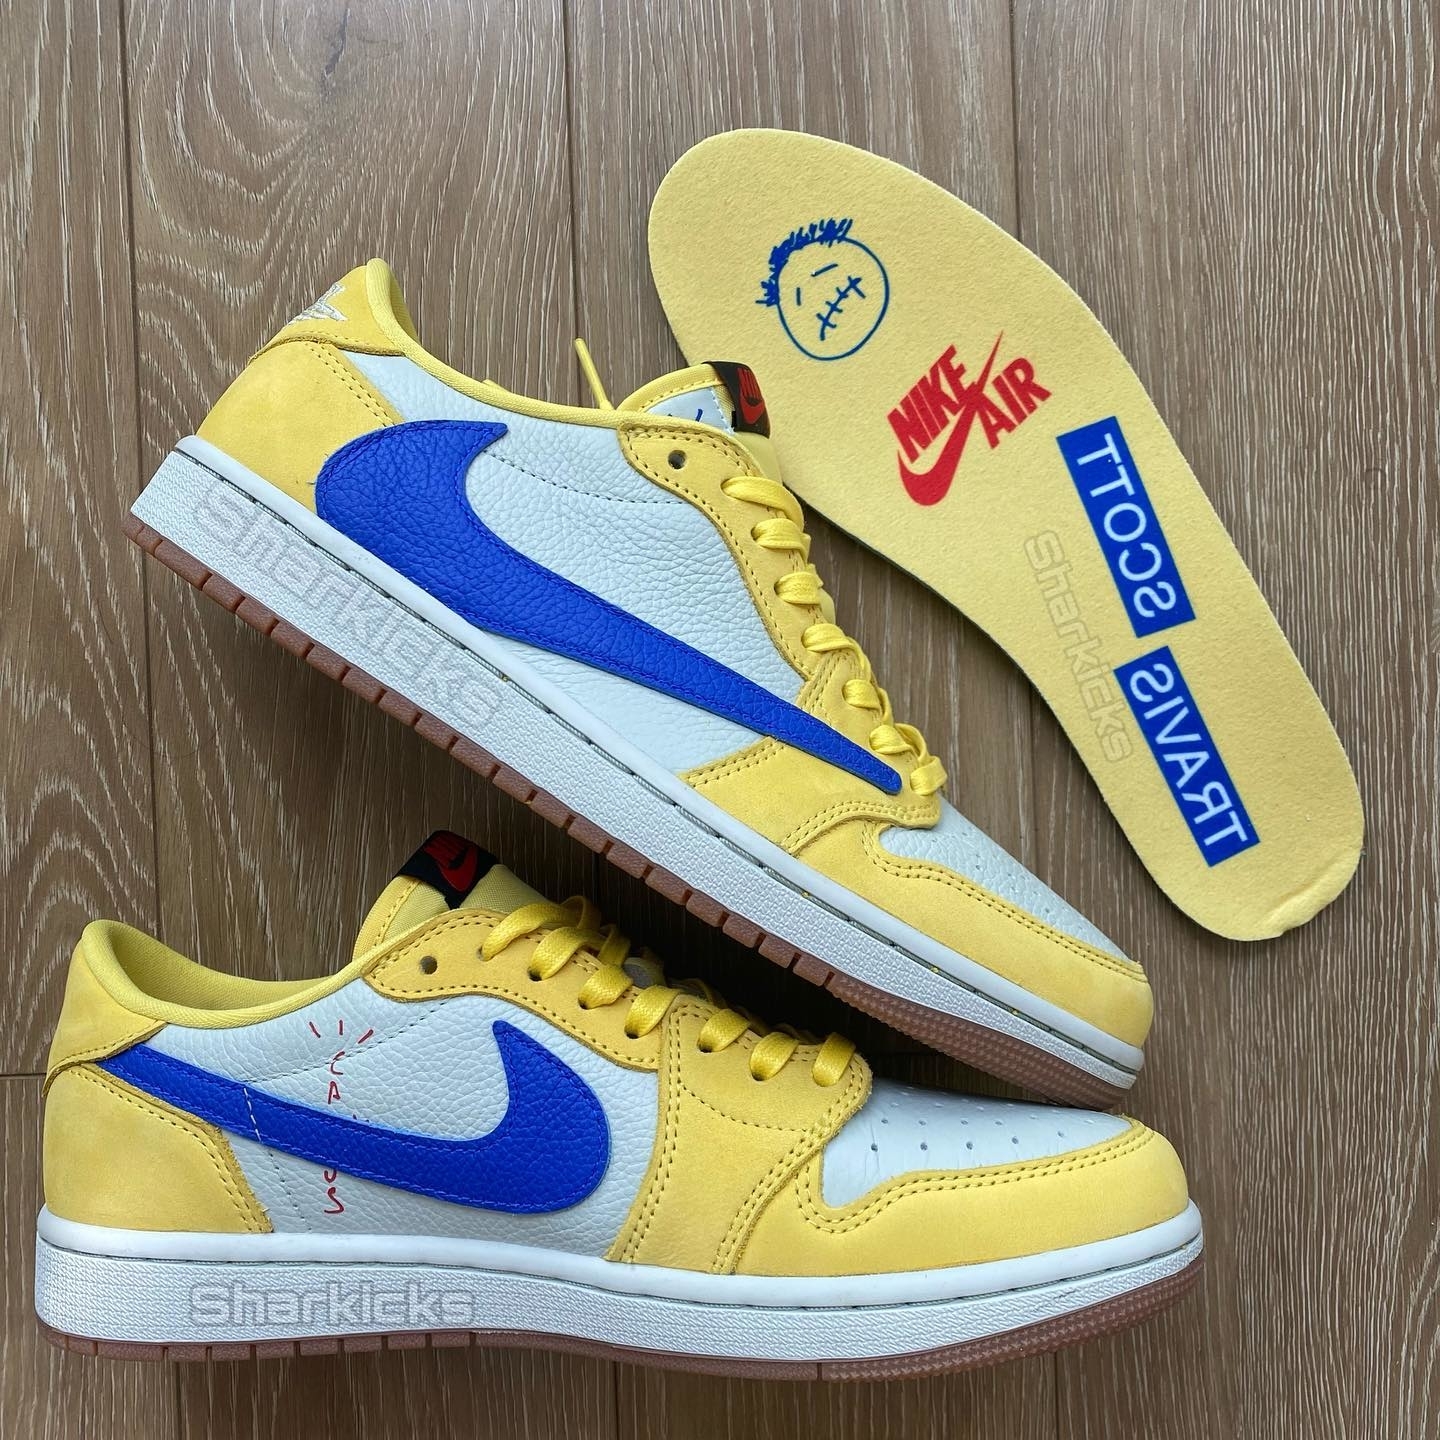 In-Hand Look at the Travis Scott x Air Jordan 1 Low 'Canary Yellow' 